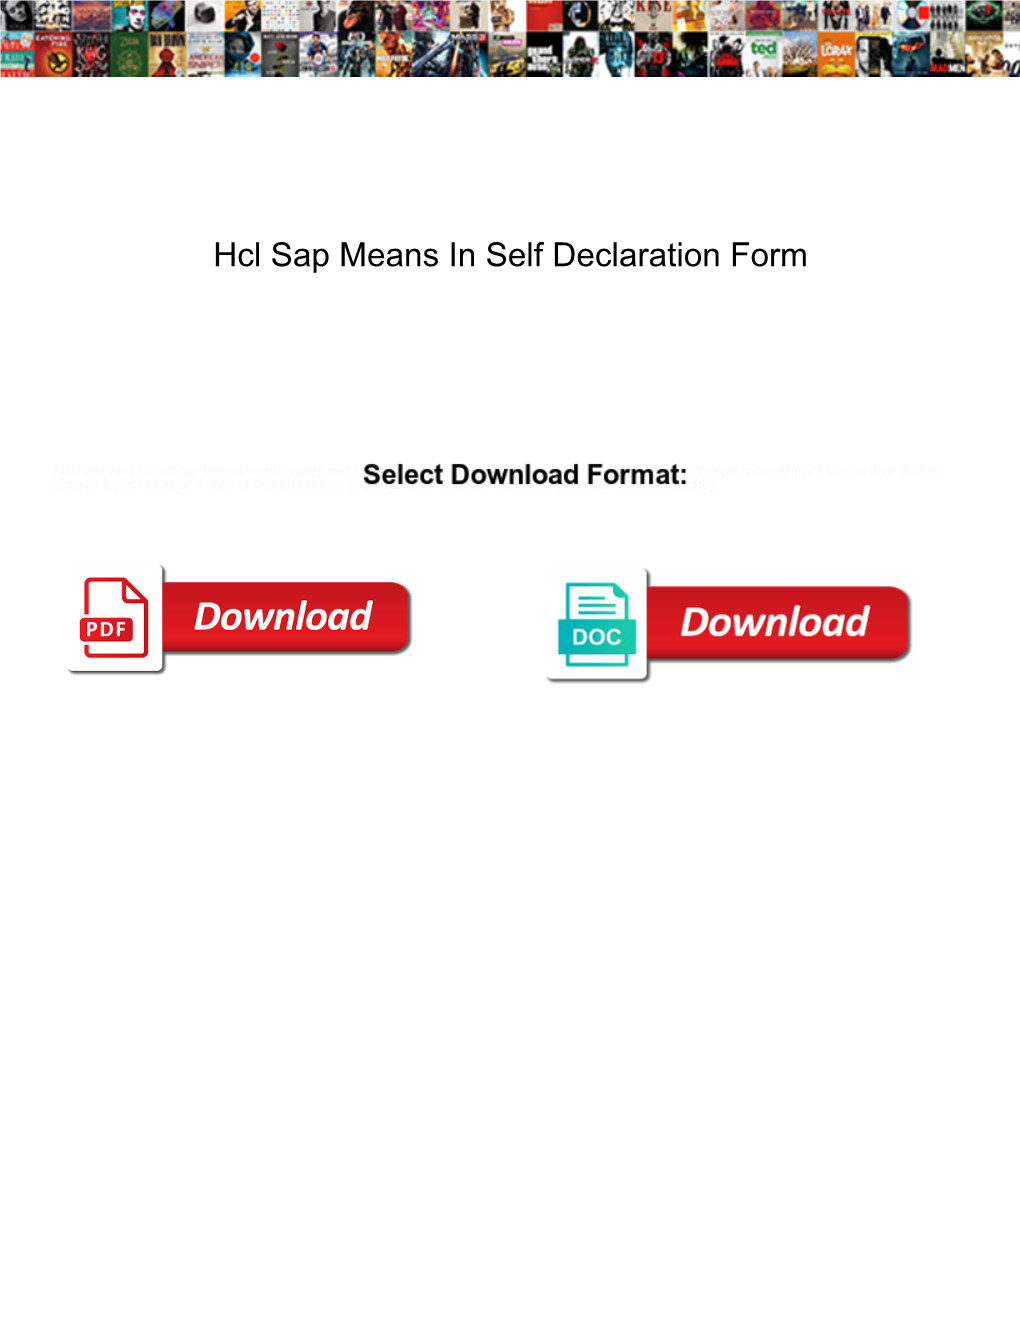 Hcl Sap Means in Self Declaration Form